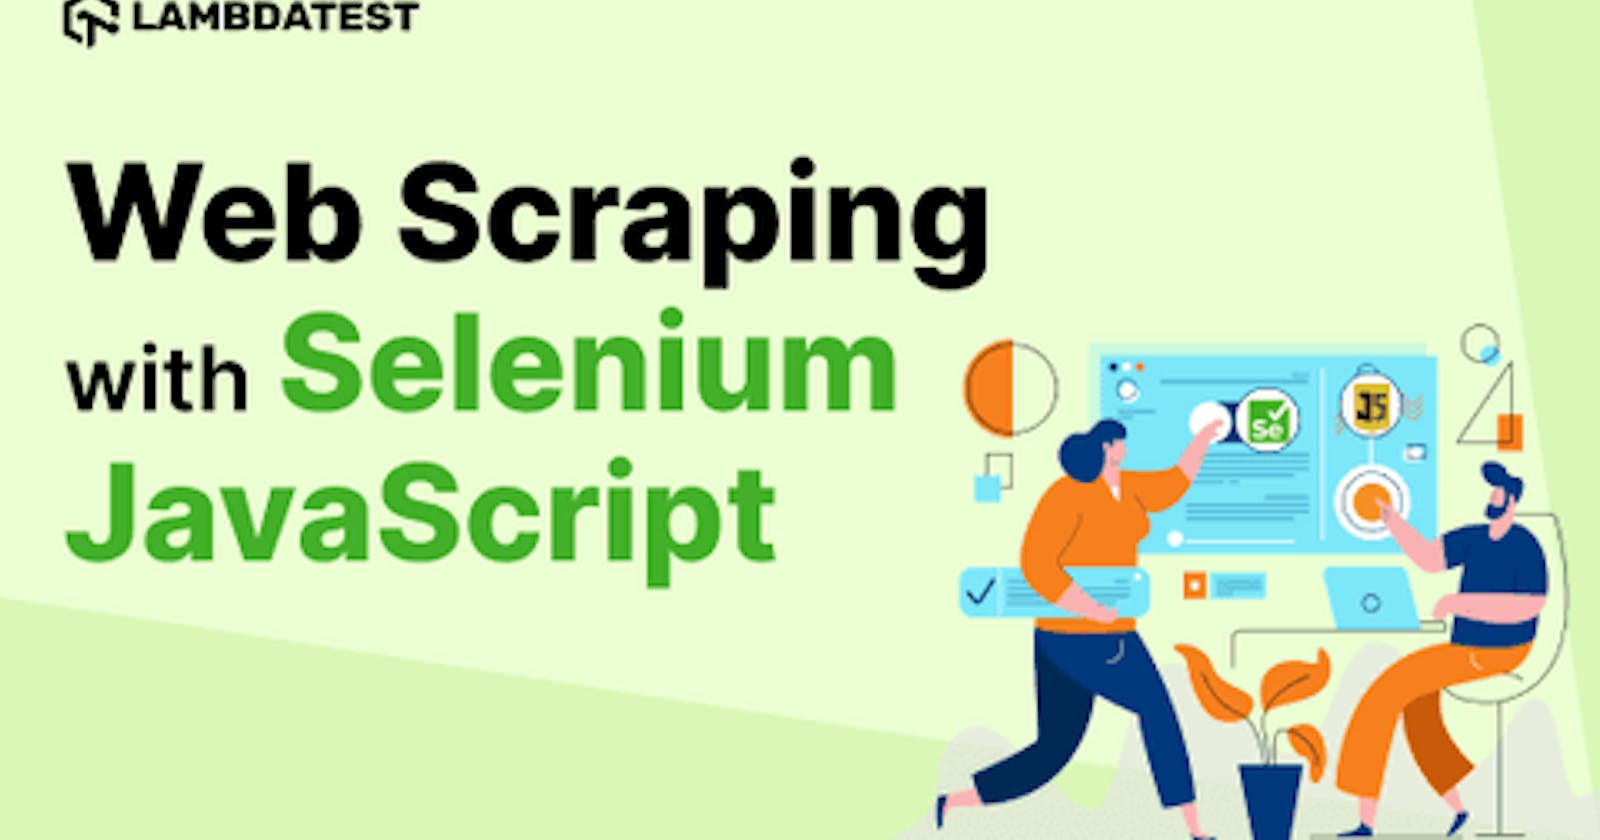 How To Perform Web Scraping With JavaScript And Selenium